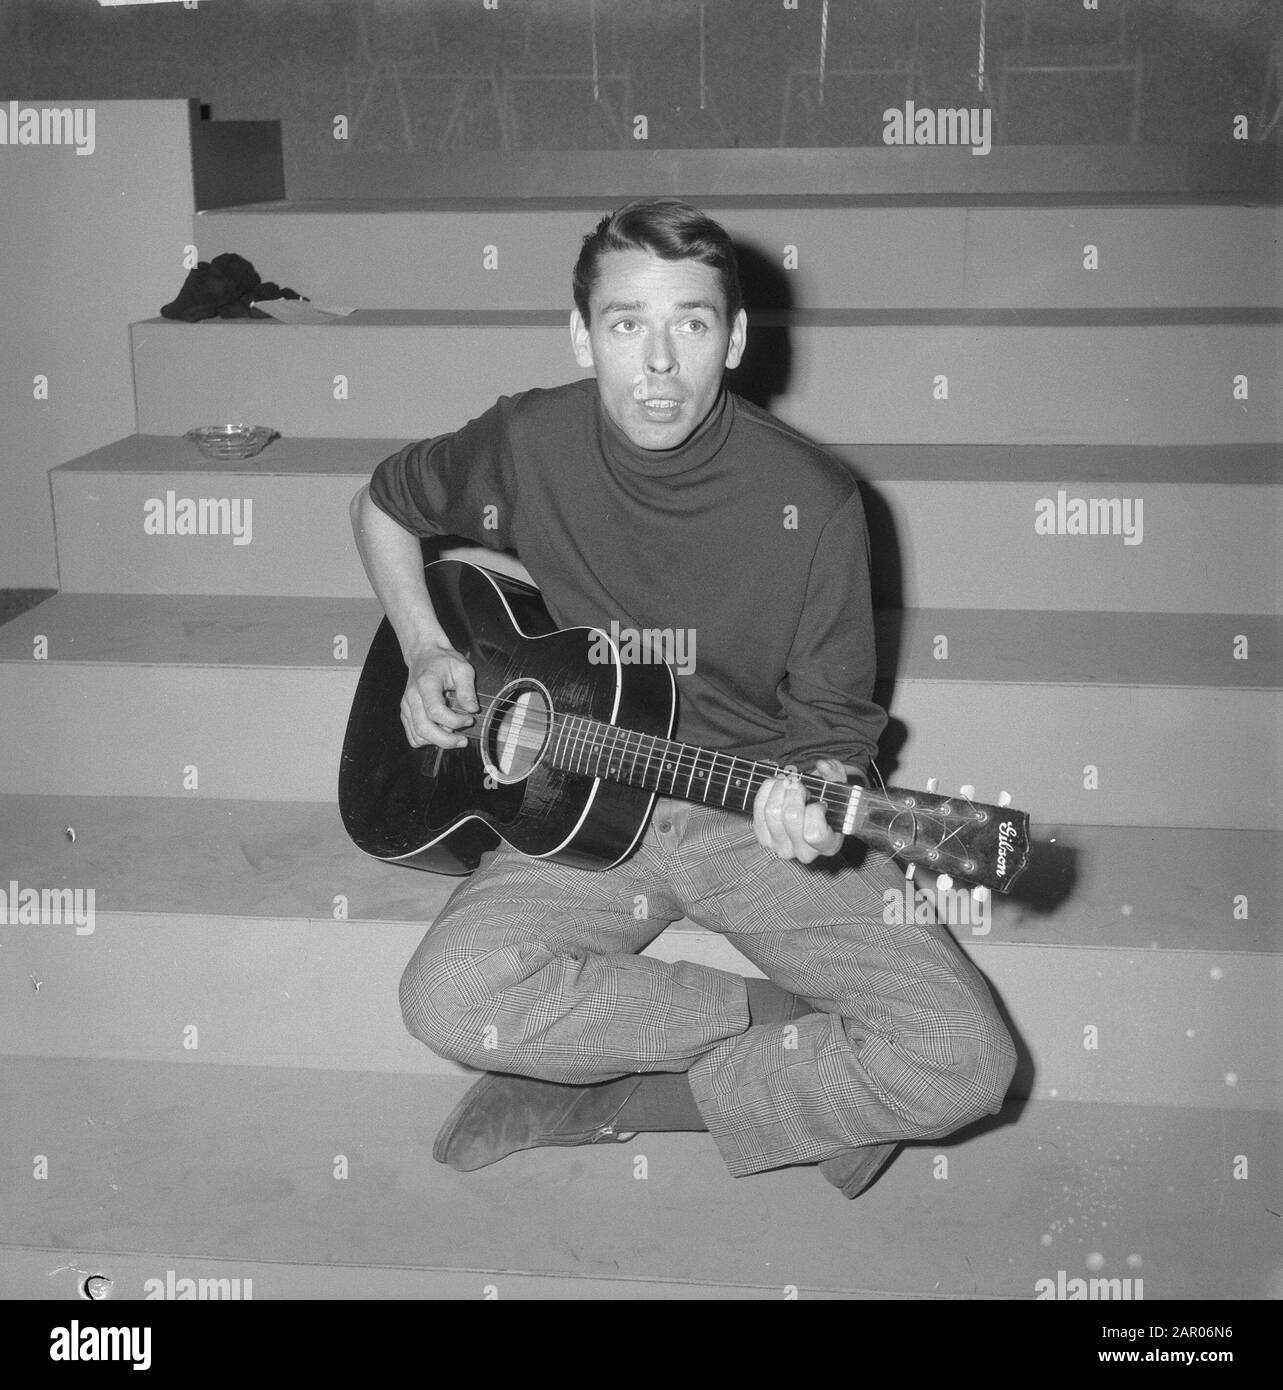 Jacques Brel in TV program Domino Date: March 21, 1962 Keywords: TV shows,  guitars, singers Personal name: Brel, Jacques Stock Photo - Alamy